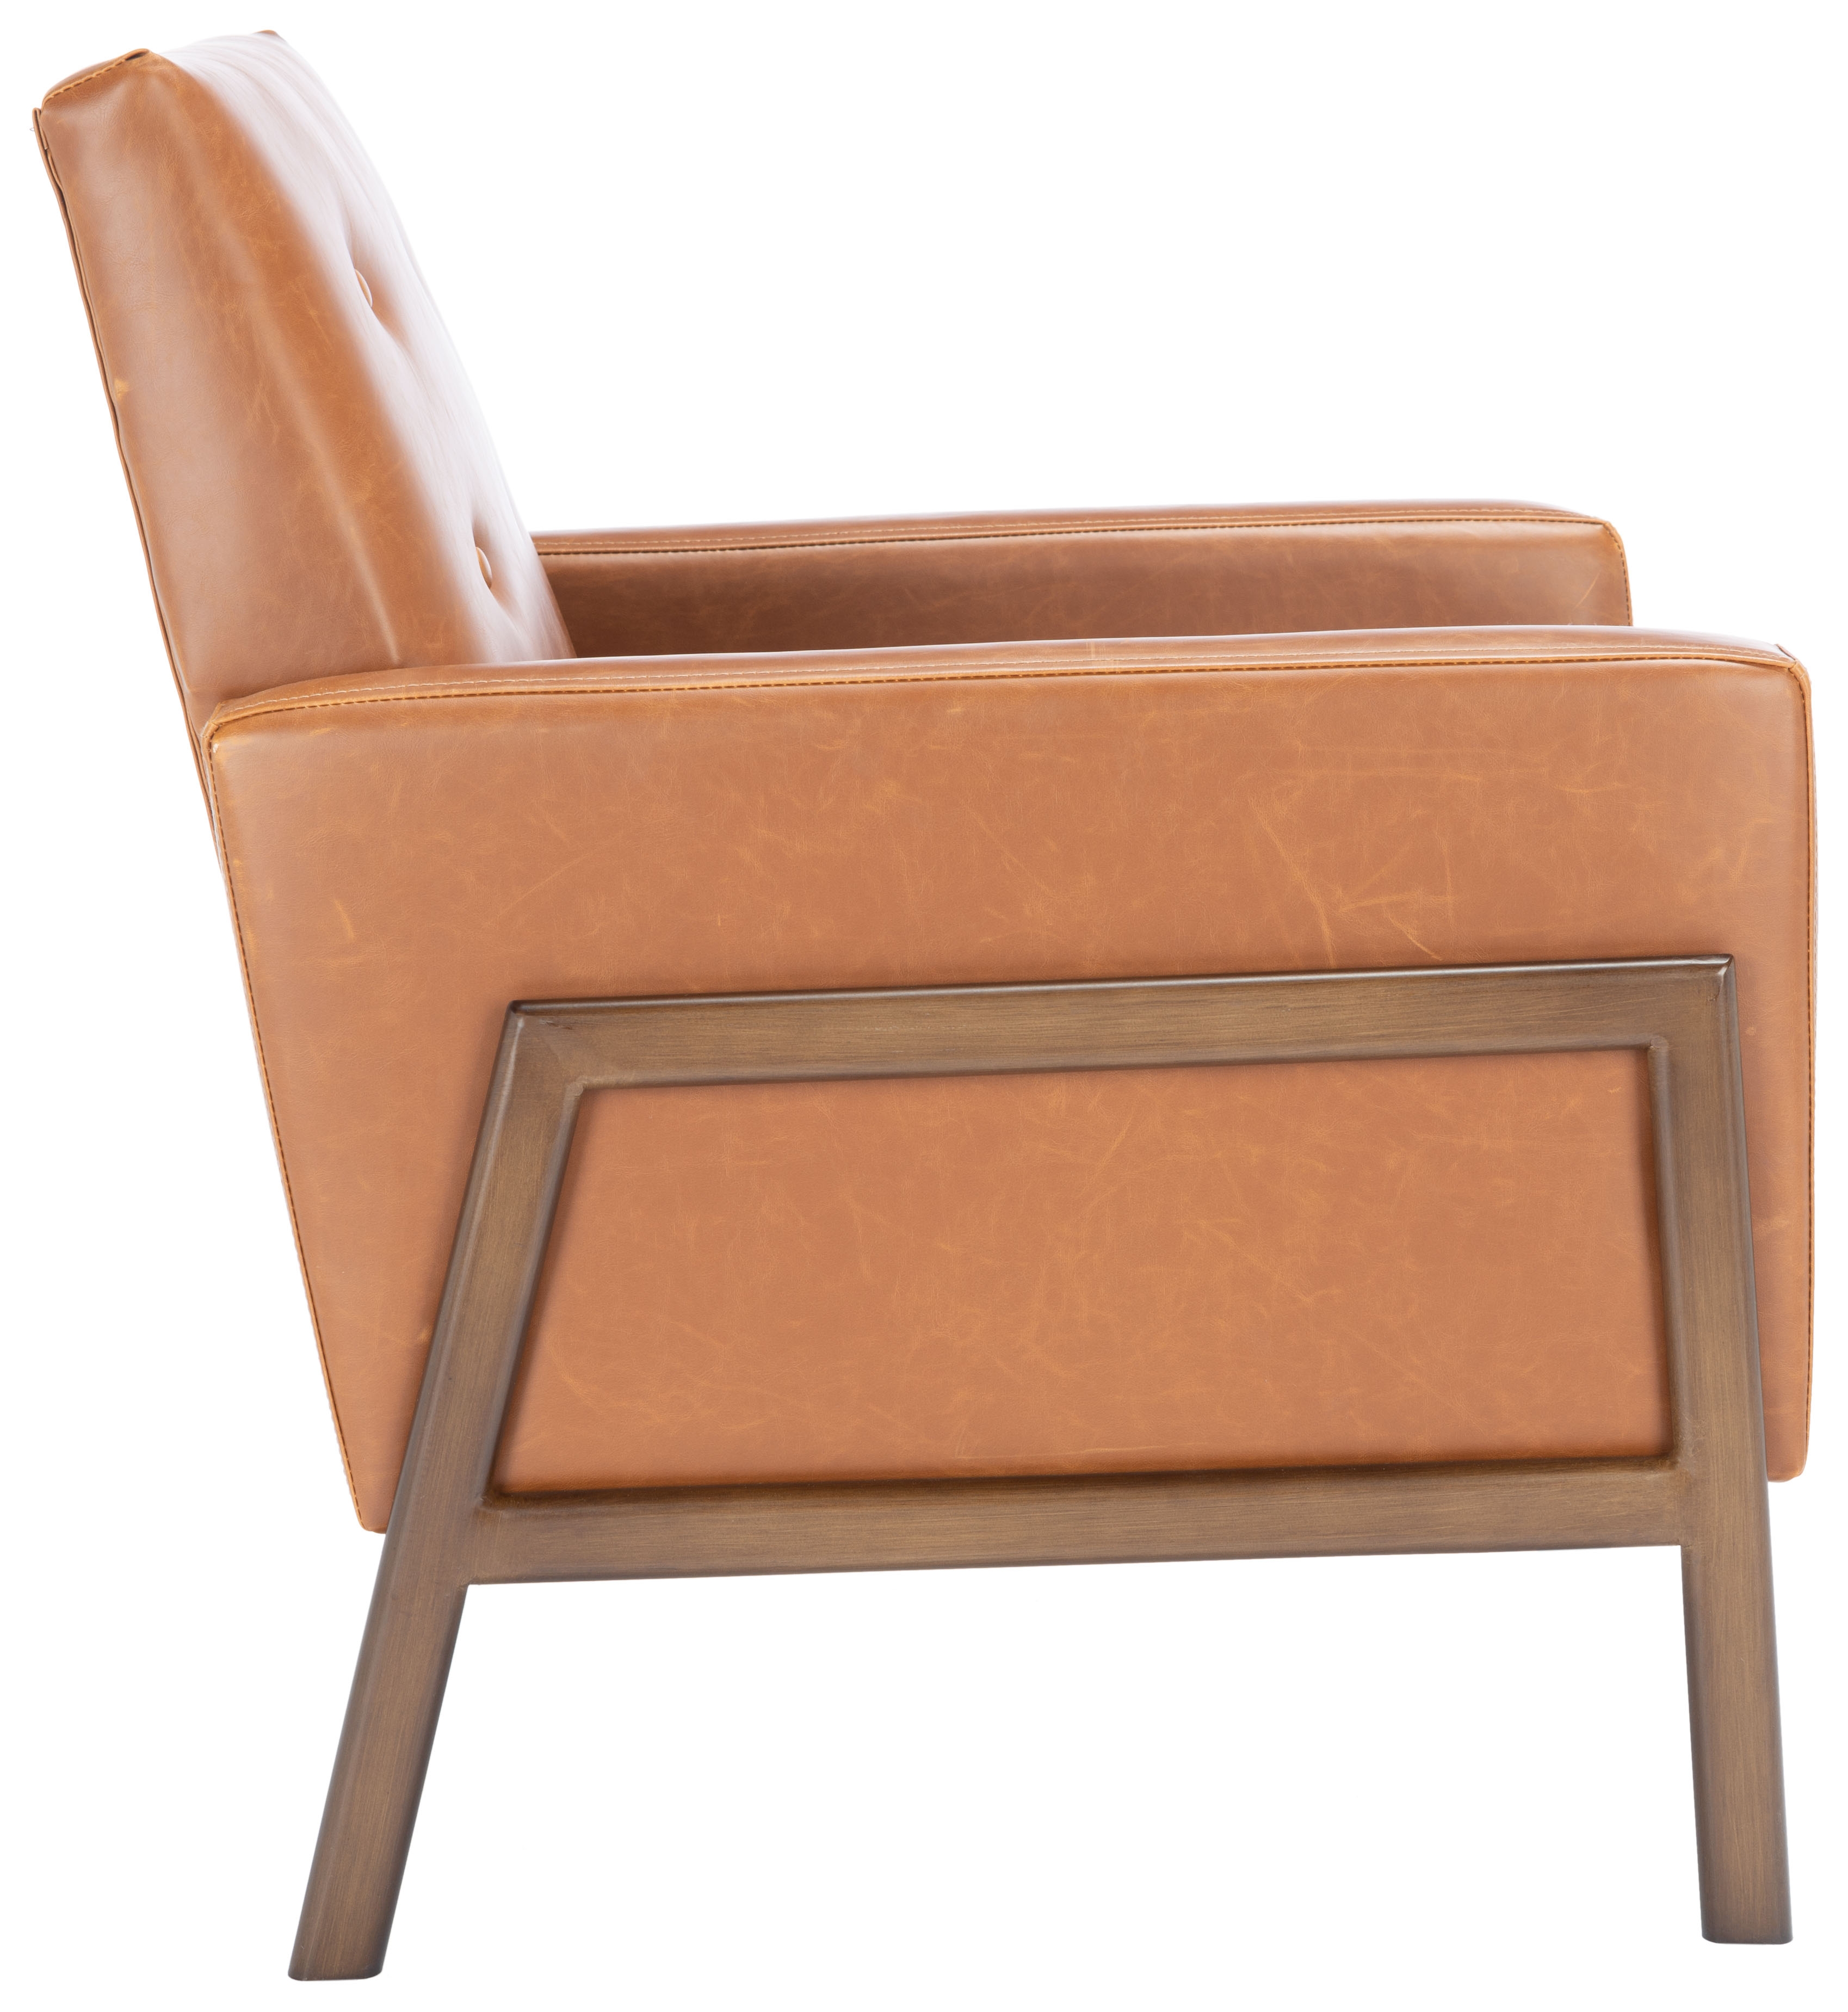 Visby Chair - Image 3